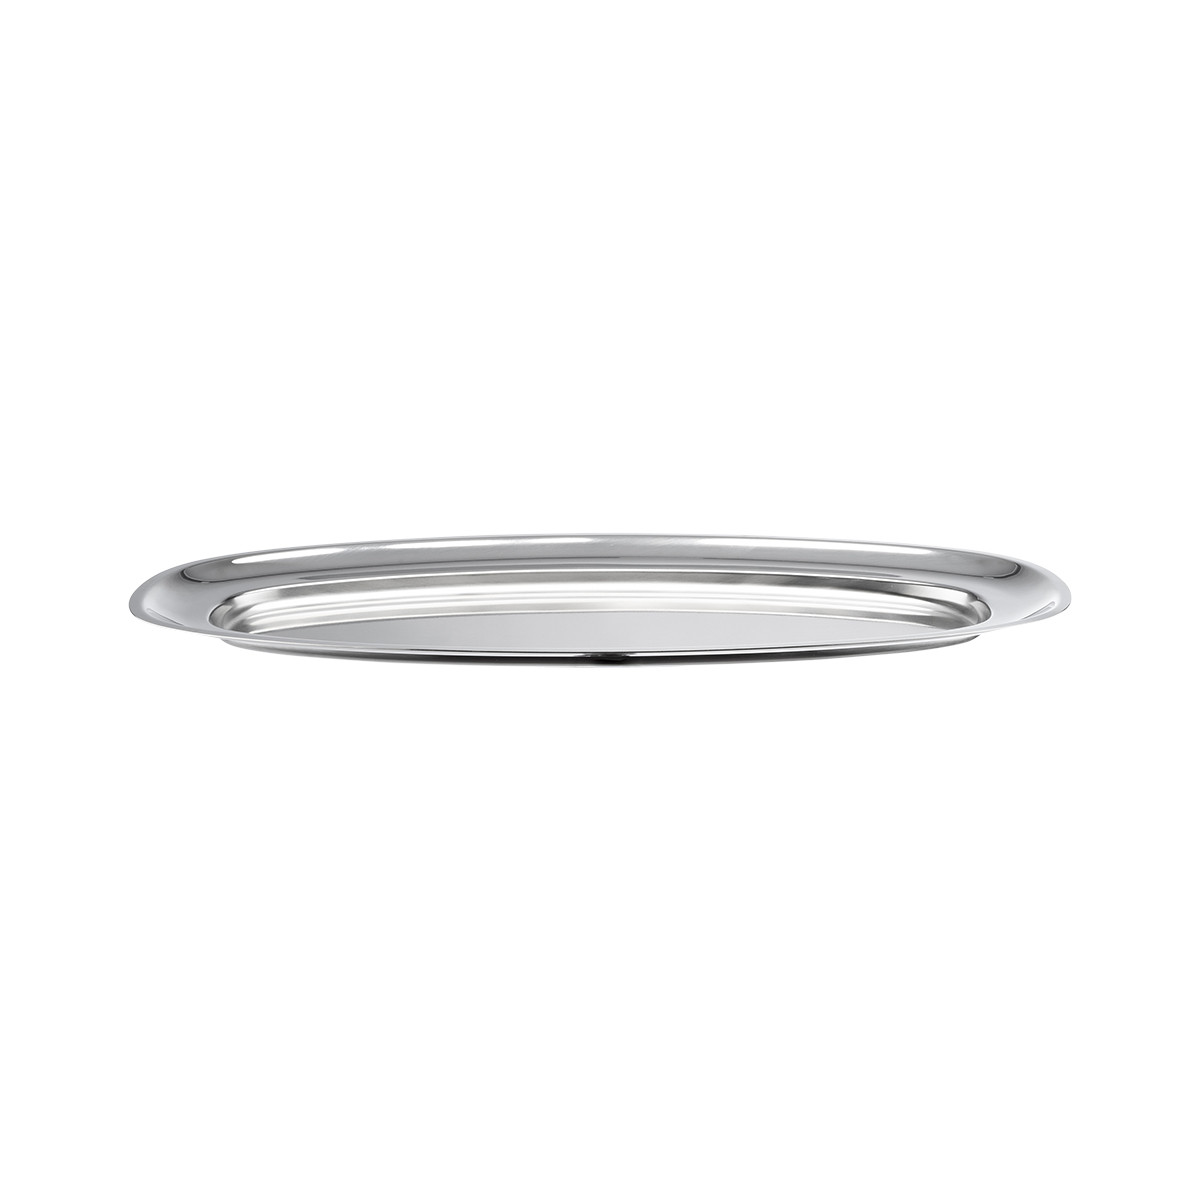 FISH TRAY 52x24 cm, STAINLESS STEEL